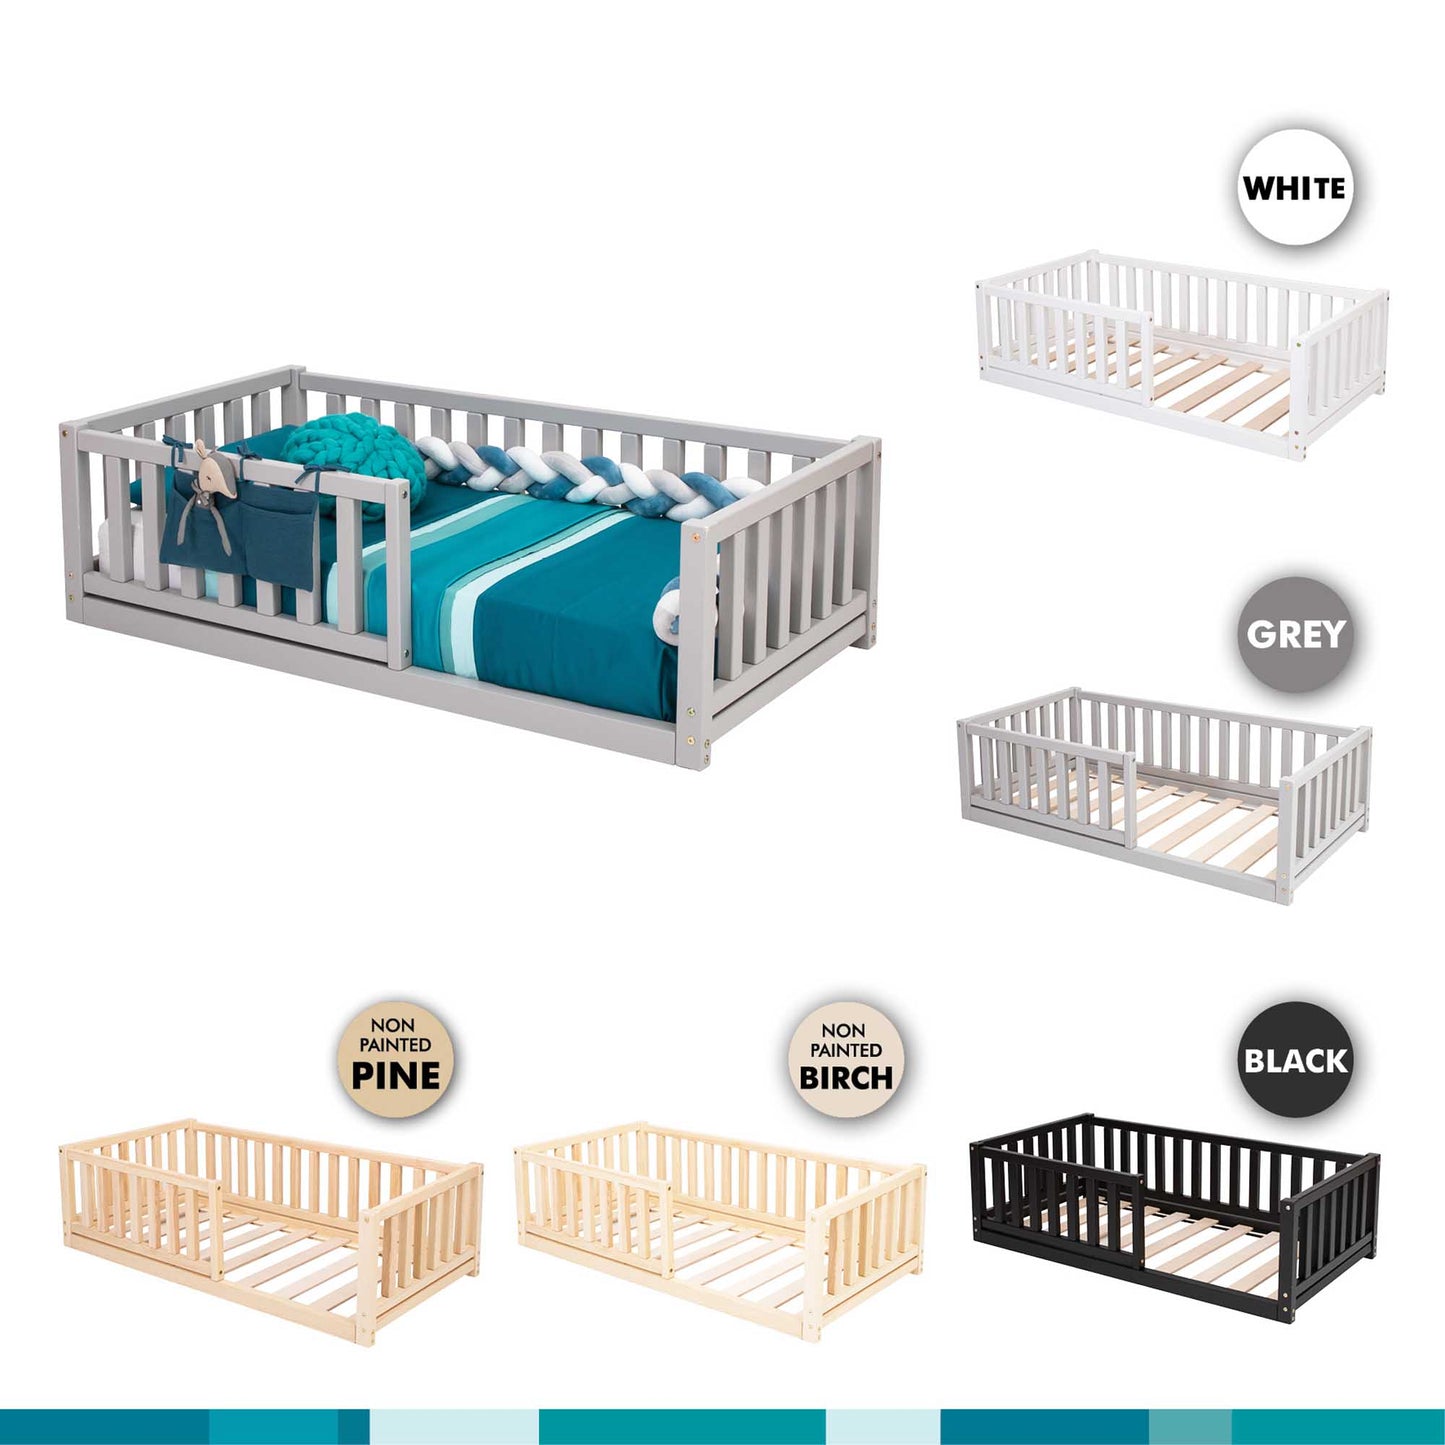 A long-lasting Sweet Home From Wood 2-in-1 toddler bed on legs with a vertical rail fence available in different colors and styles.